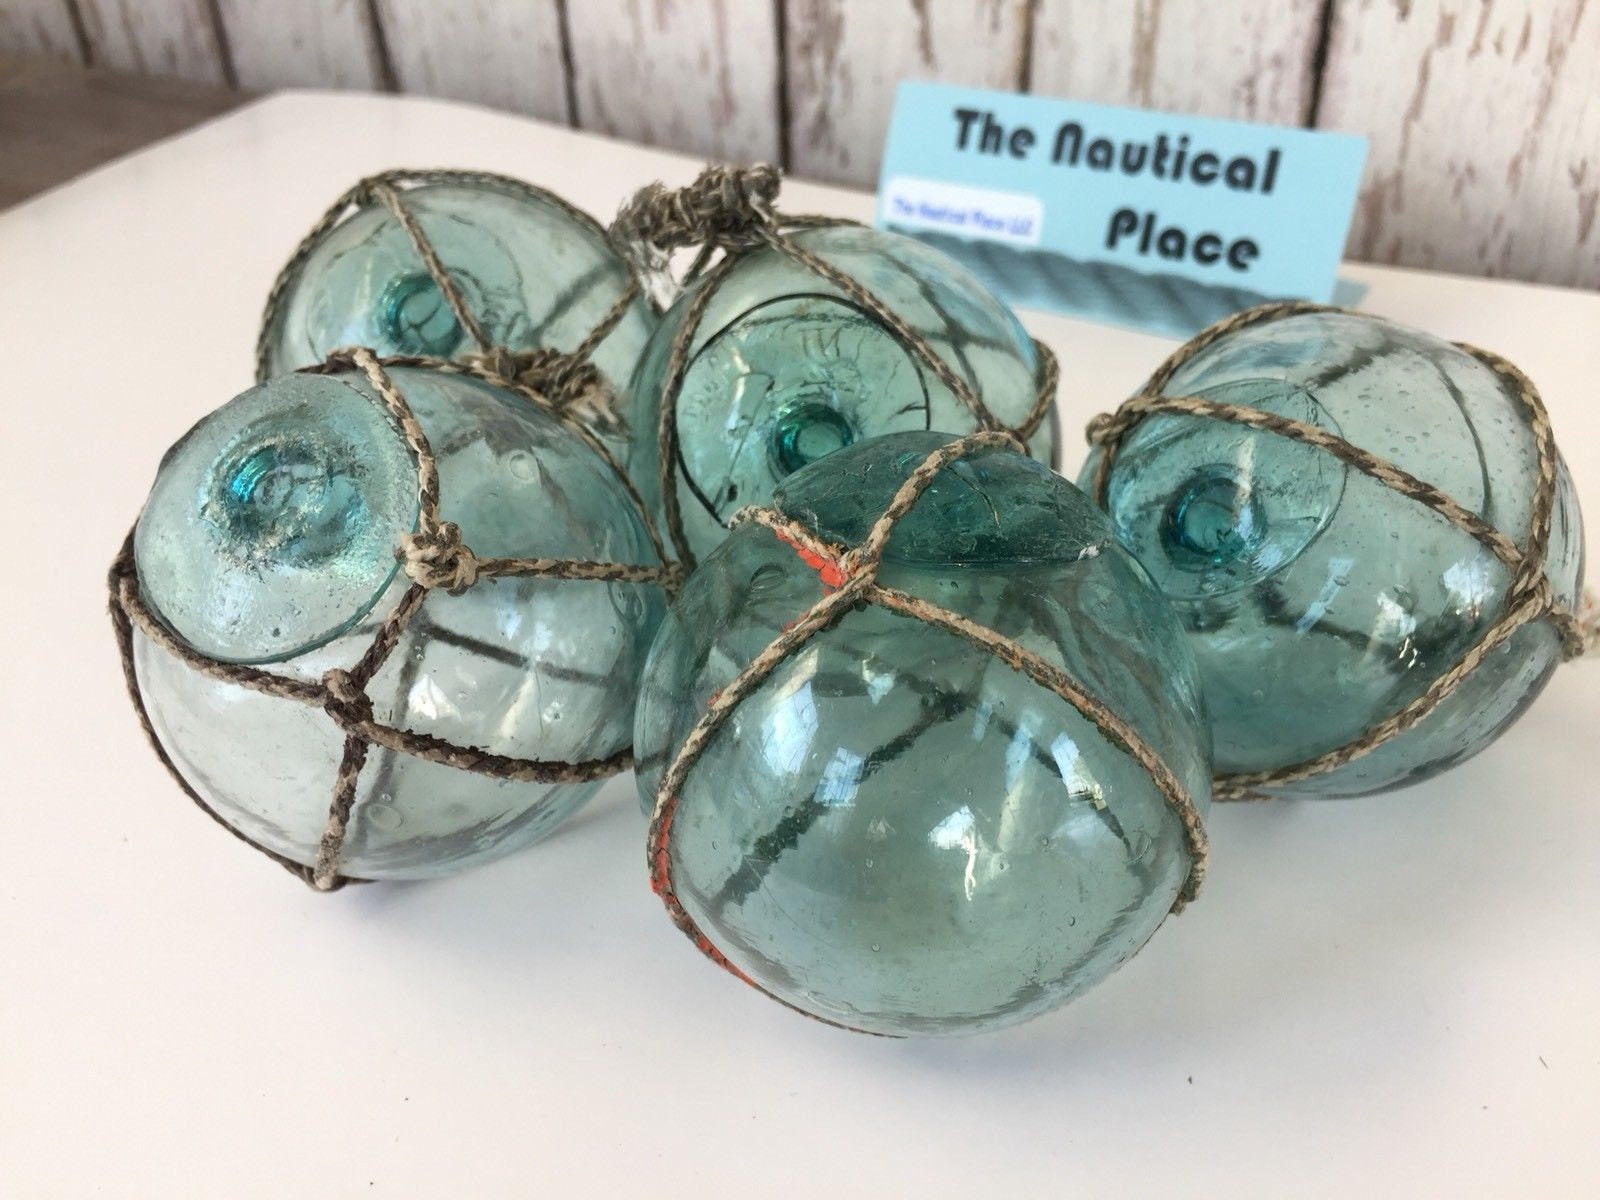 Japanese Glass Floats, Old Fish Net Buoys, Vintage Floats Once Used by  Fisherman in Japan, Assorted Sizes, Mix of Aquas & Greens -  Canada